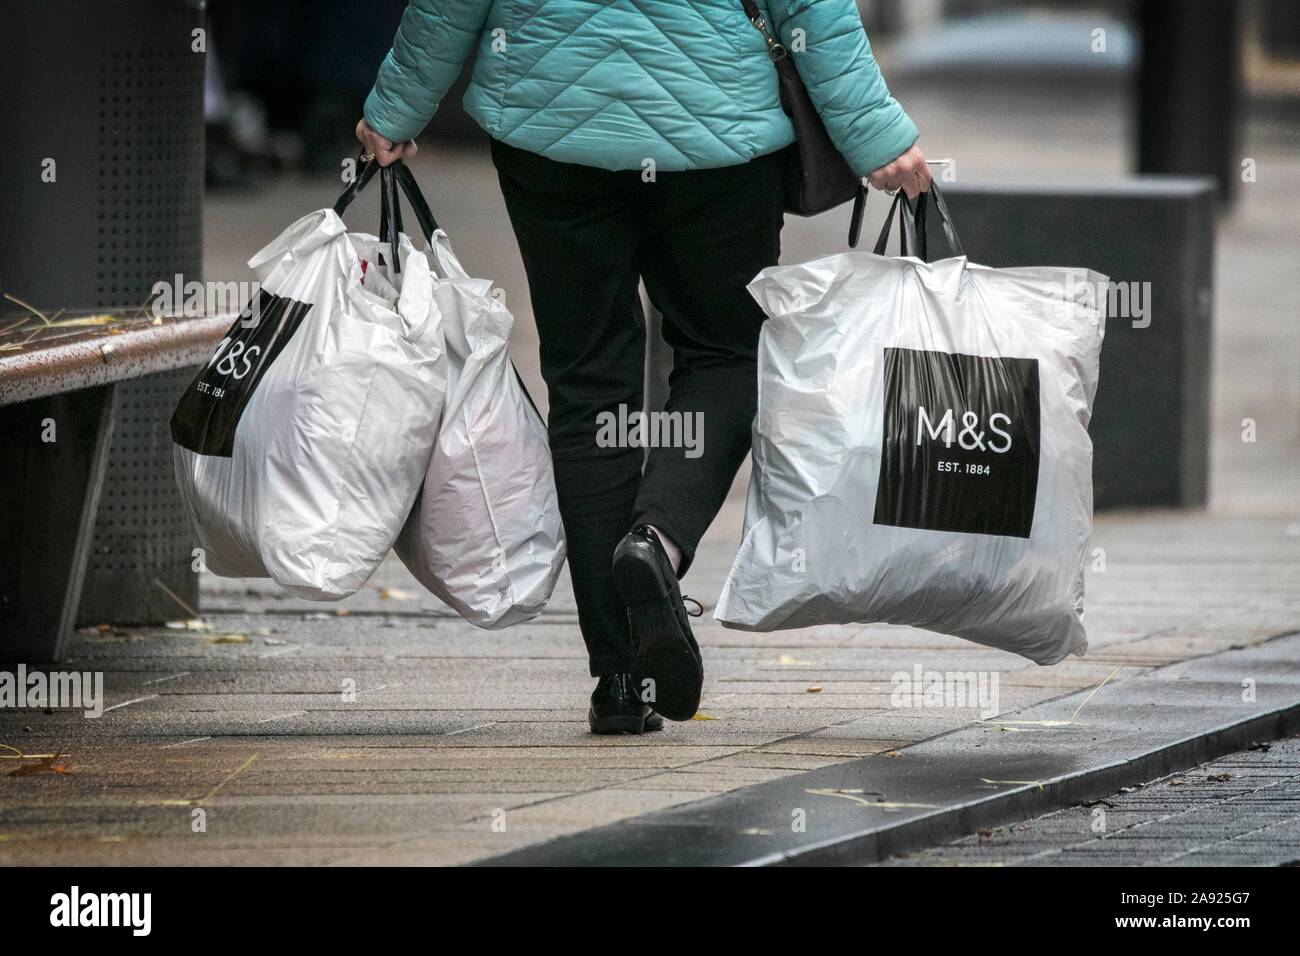 M&S swapping plastic carrier bags for paper ones in all stores, News